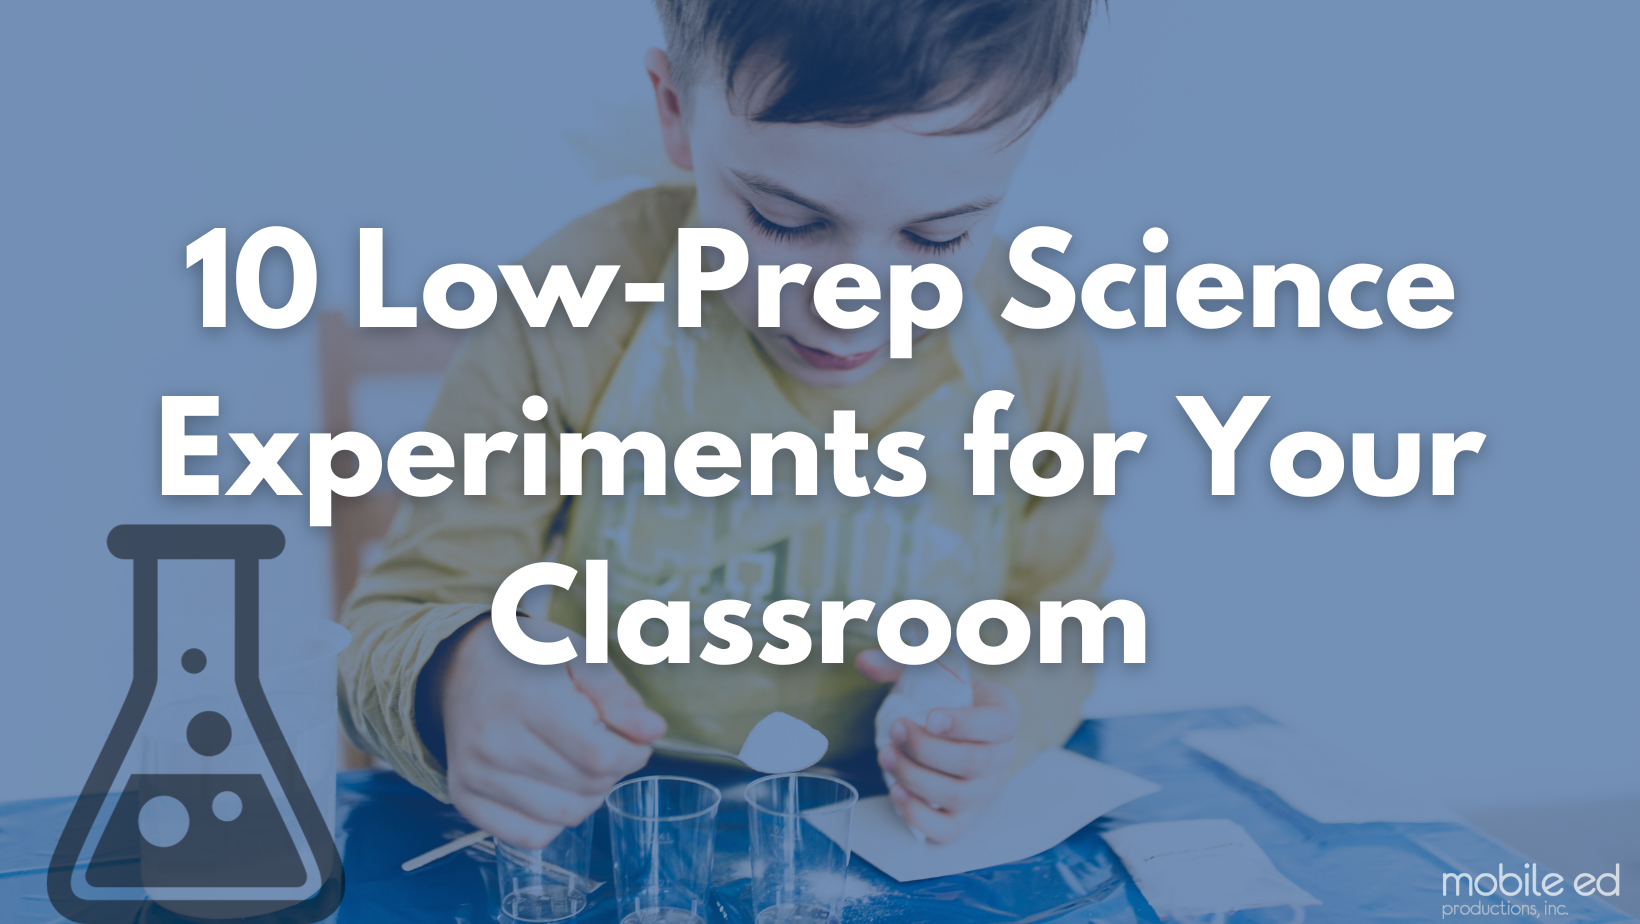 10 Low-Prep Experiments for Your Classroom